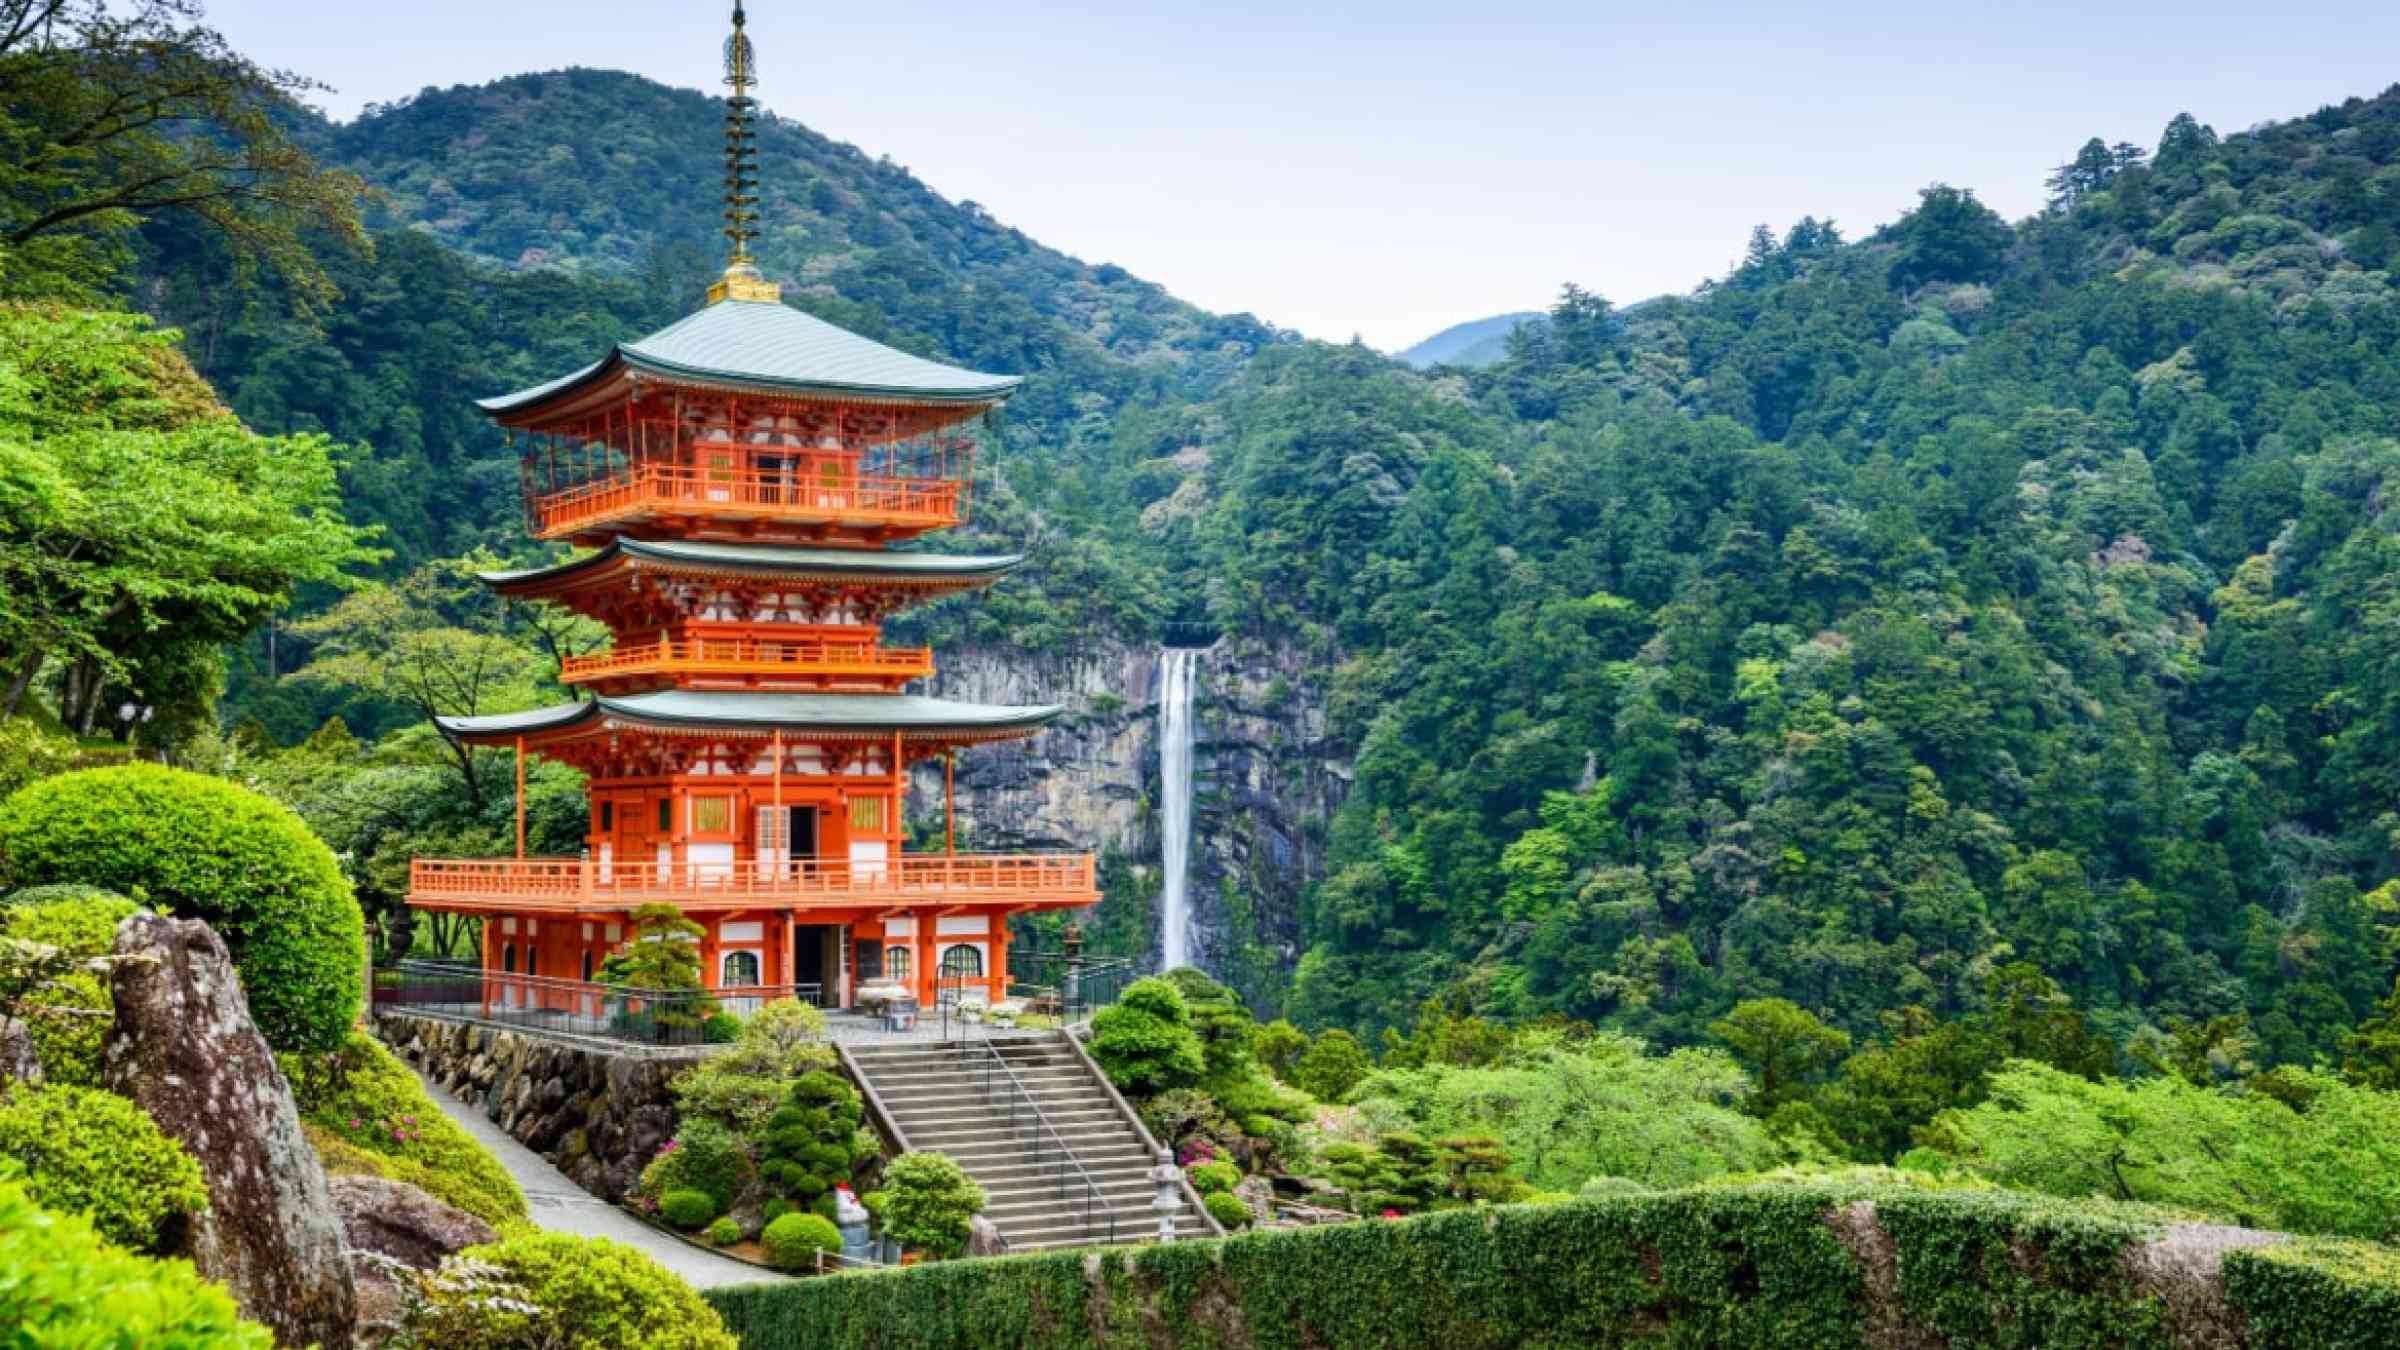 Temple in front of a waterfall in a forest in Japan.